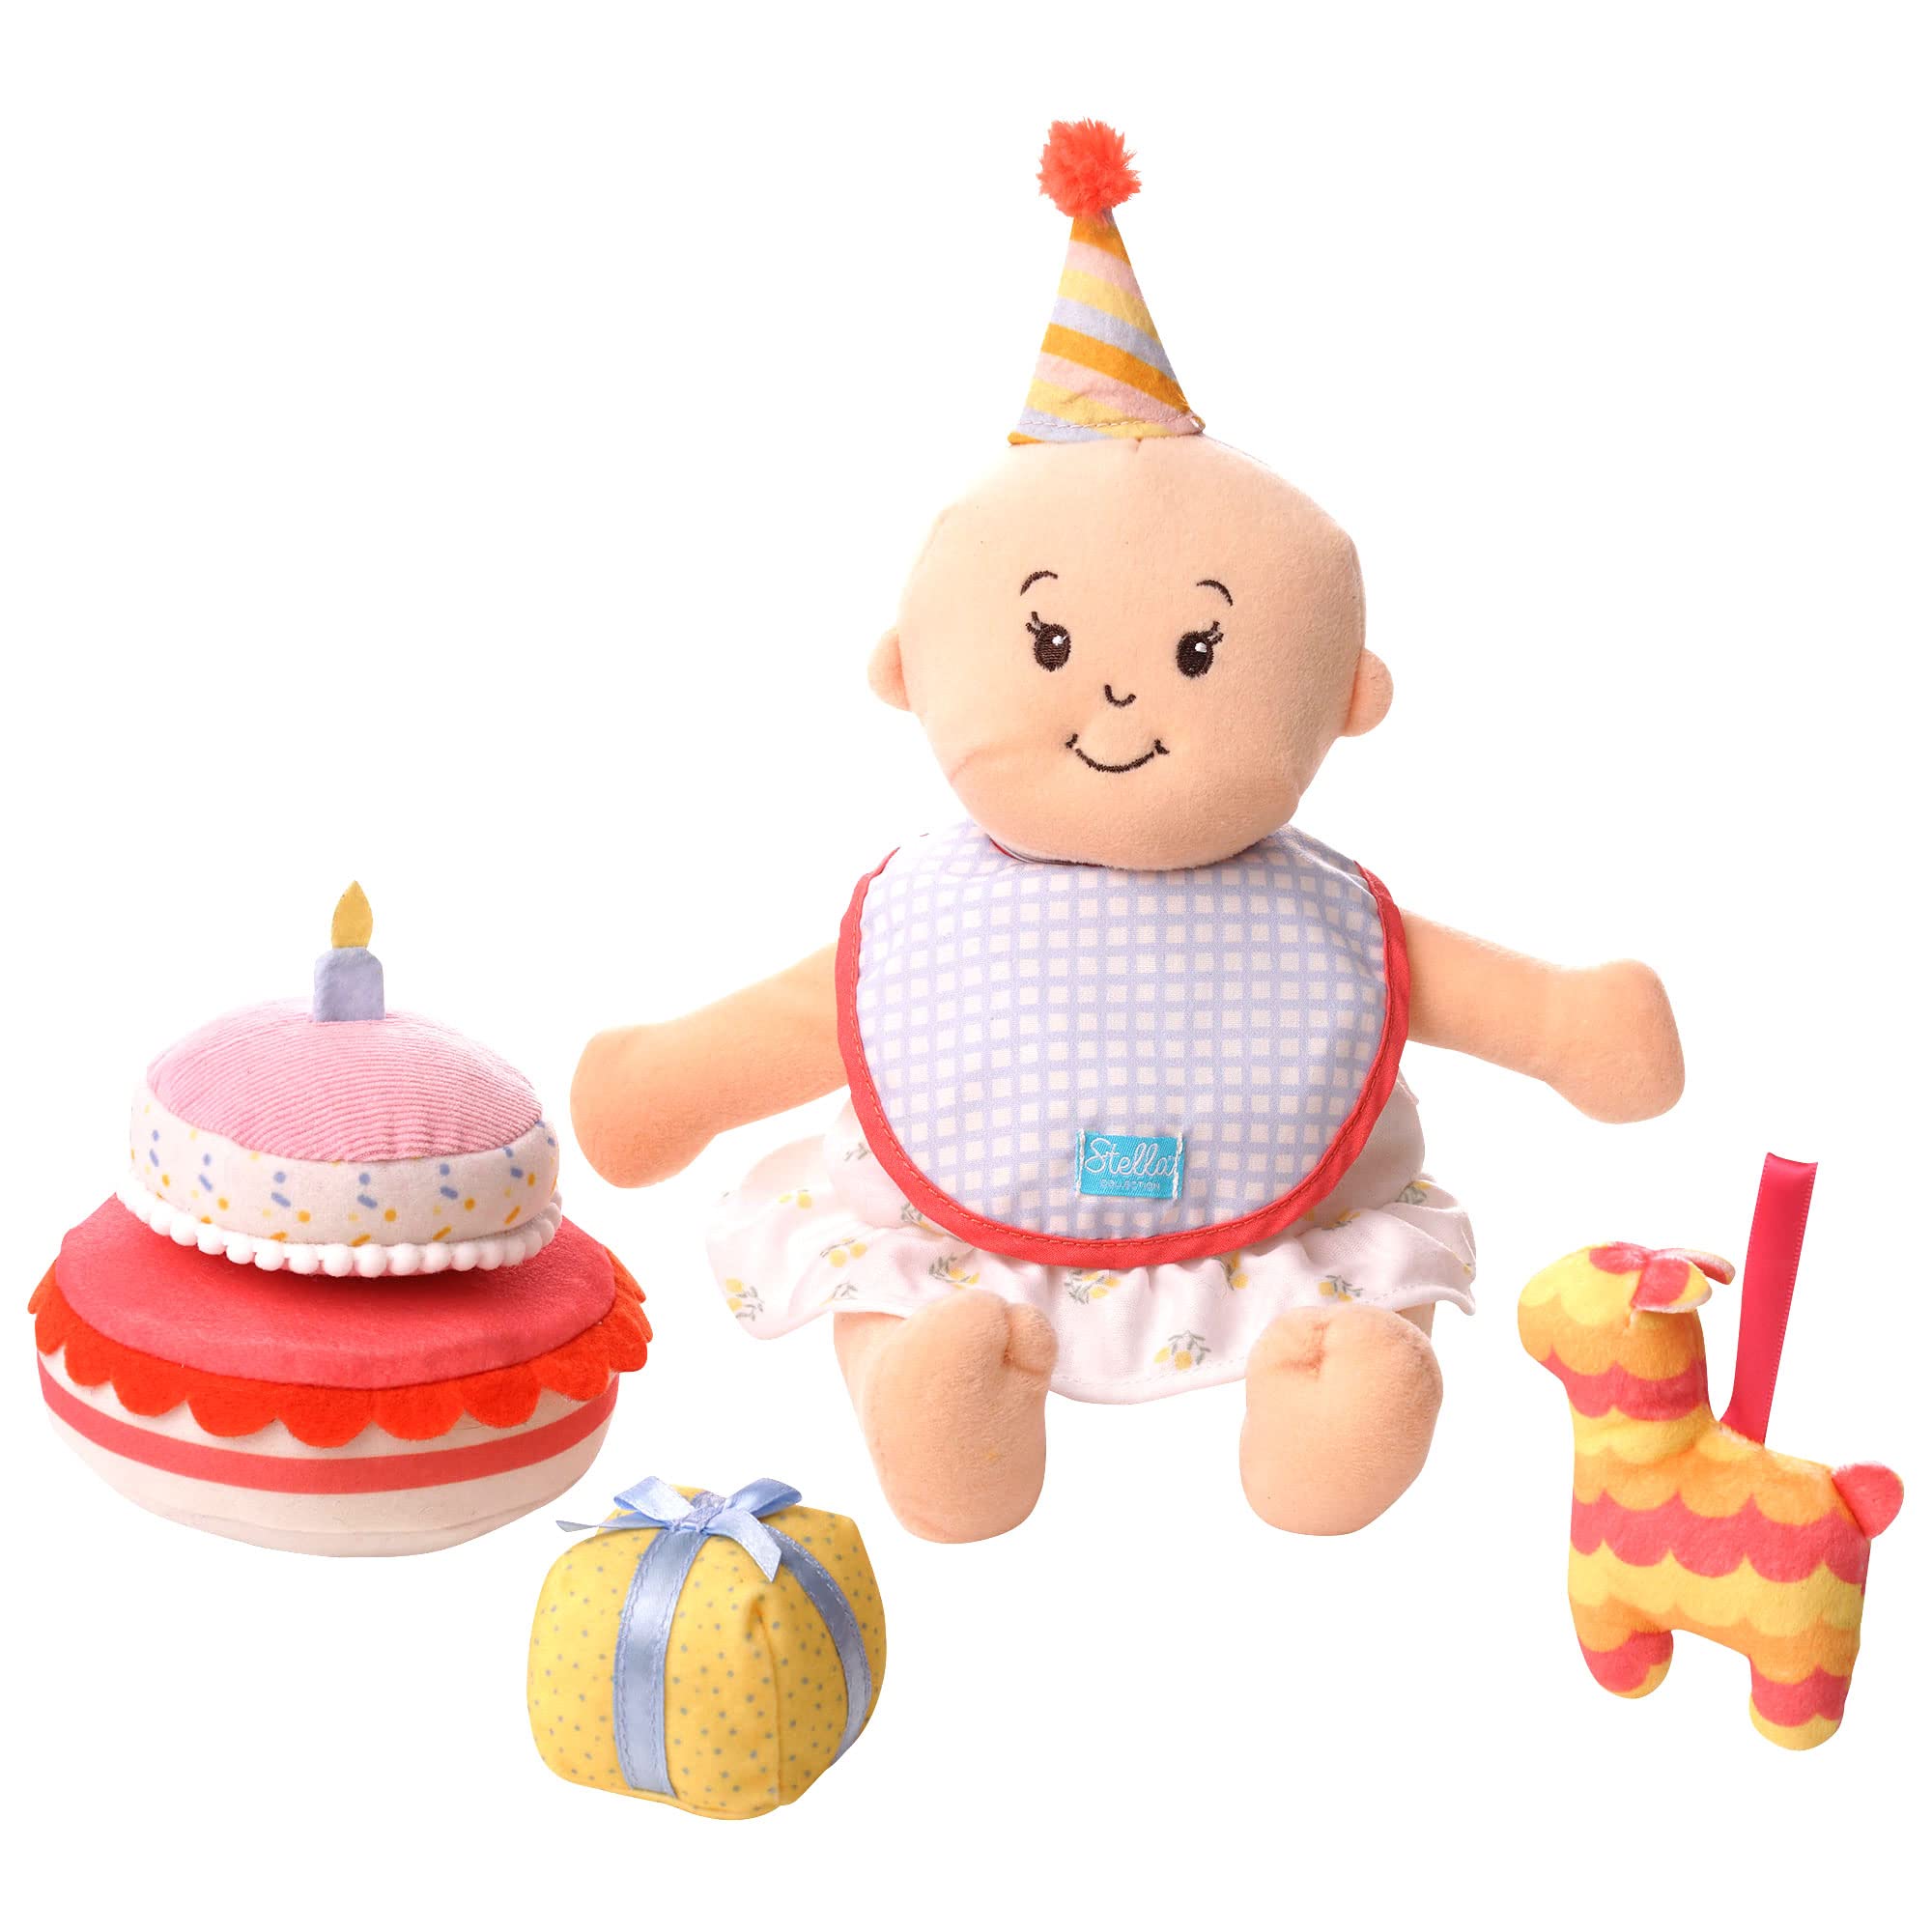 Manhattan Toy Stella Collection Birthday Party 6 Piece Baby Doll Birthday Party Playset for 12